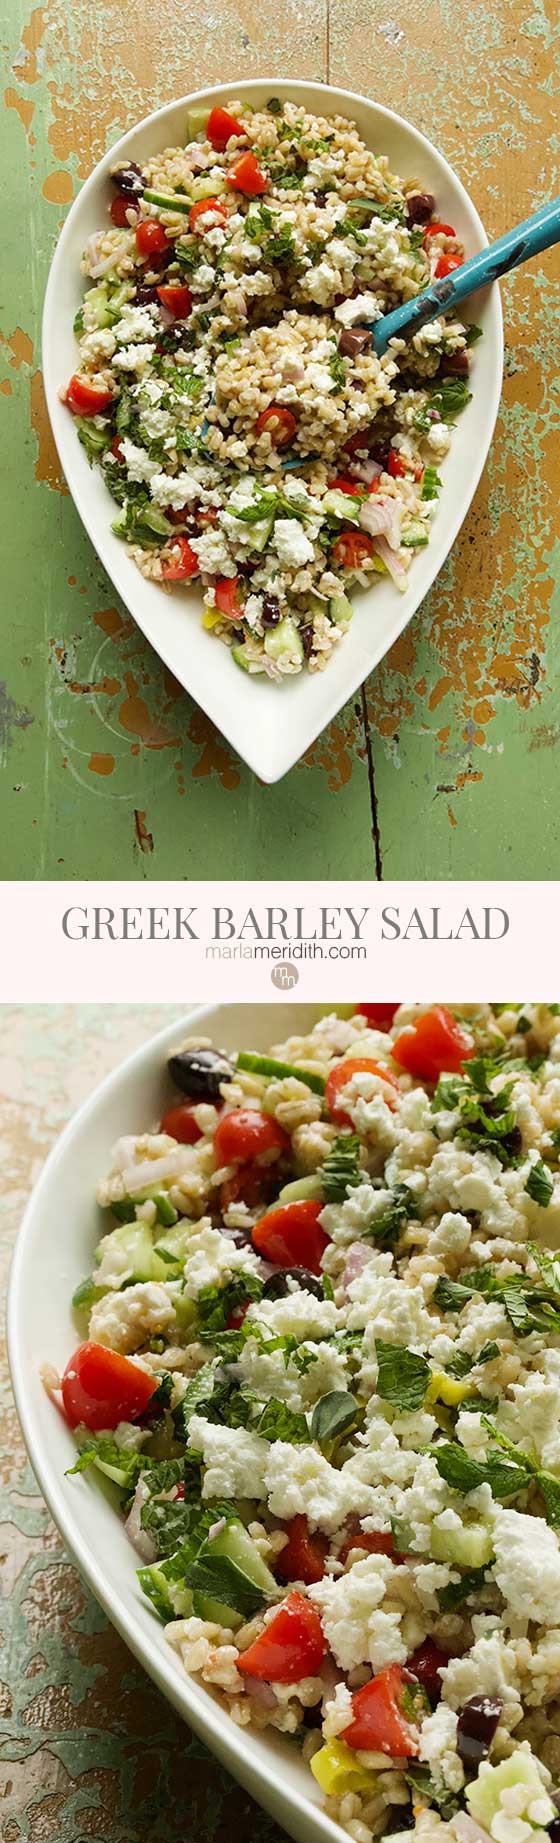 This Vegetarian Greek Barley Salad recipe is the perfect addition to any spring and summer meal planning and entertaining. MarlaMeridith.com